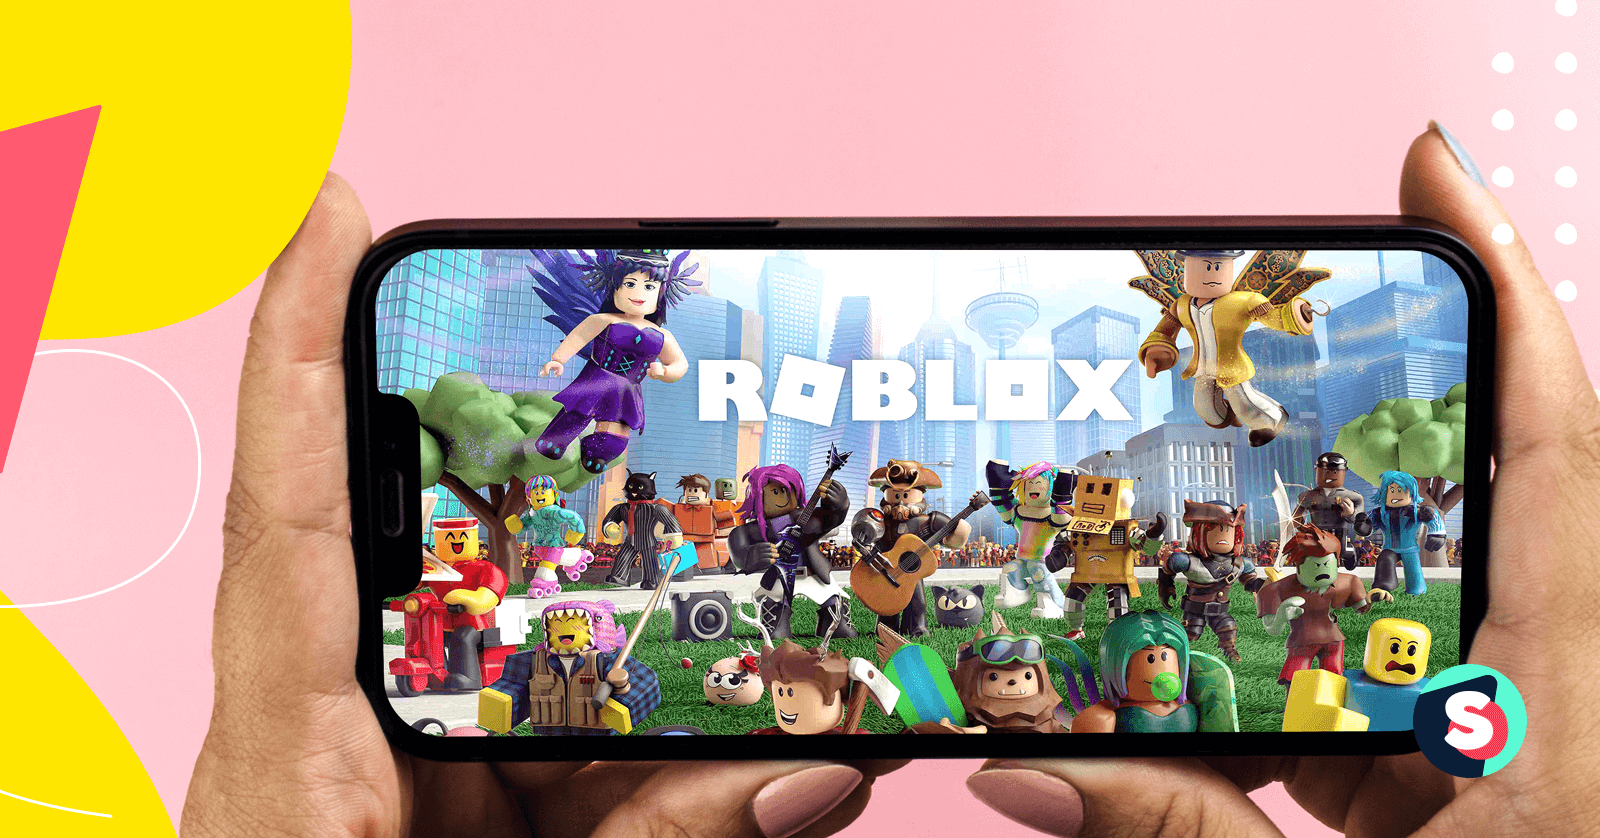 What is Roblox? Marketer's guide the social gaming platform